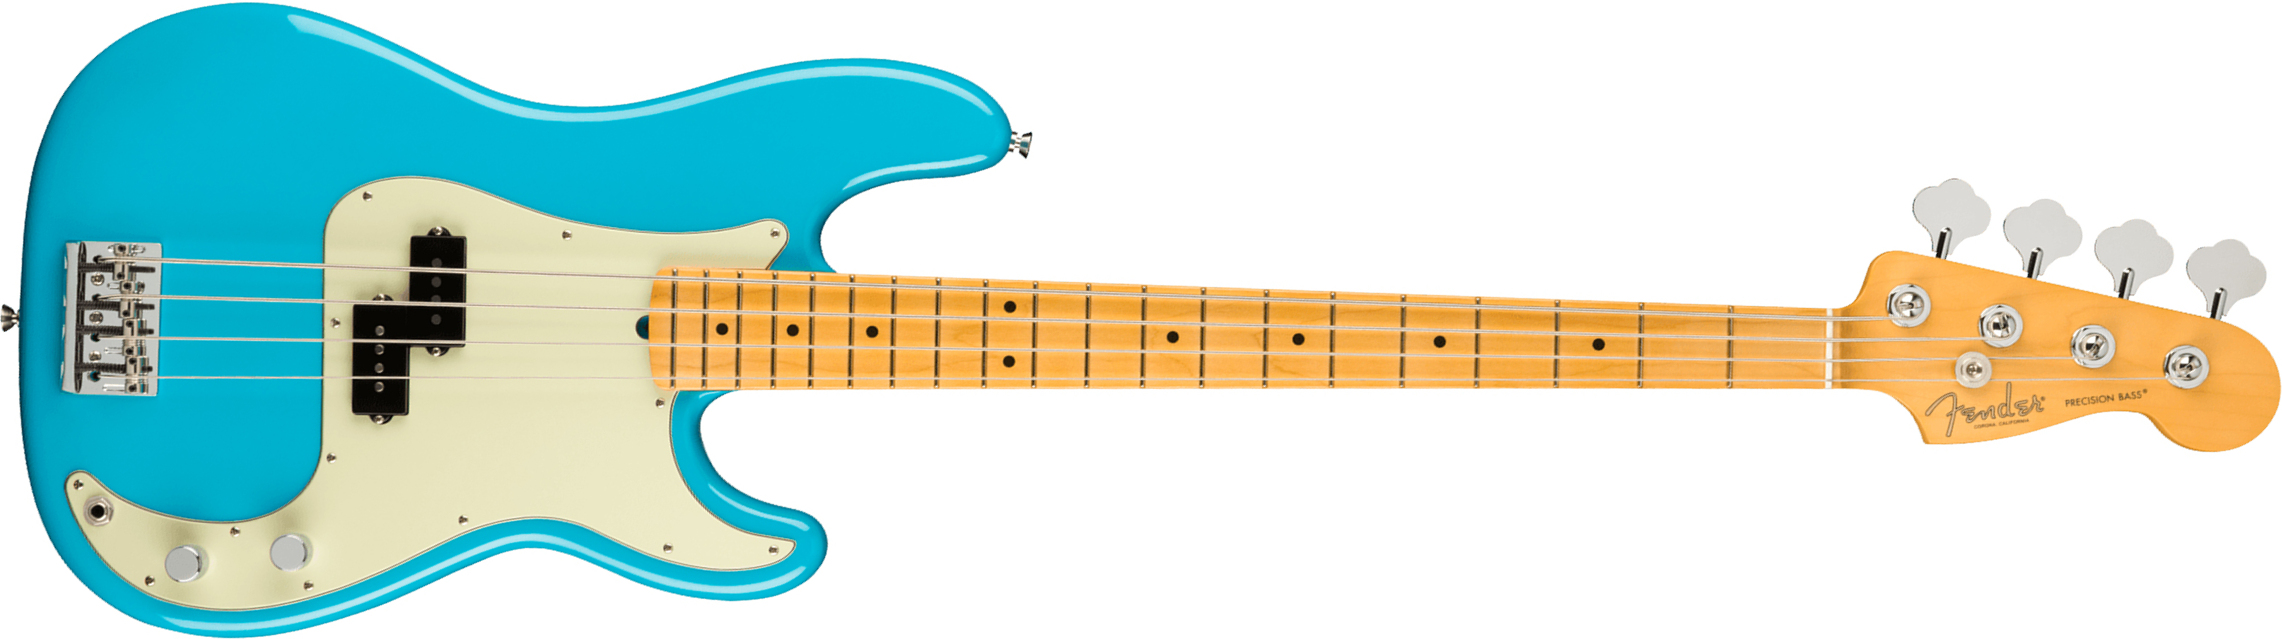 Fender Precision Bass American Professional Ii Usa Mn - Miami Blue - Solid body electric bass - Main picture